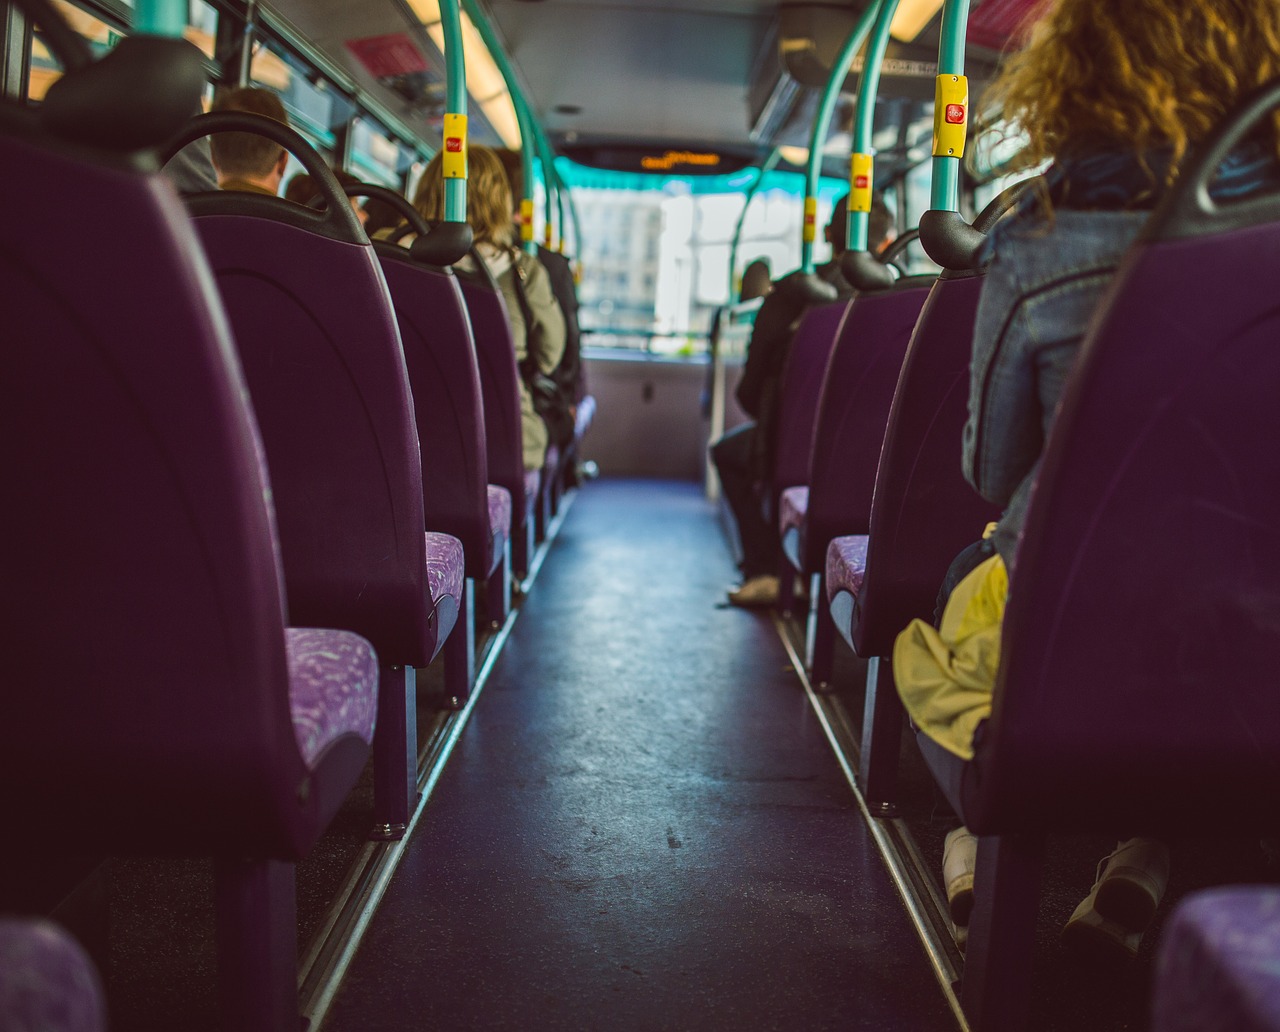 A photo of the top deck of a First Bus. The seats have purple upholstery.